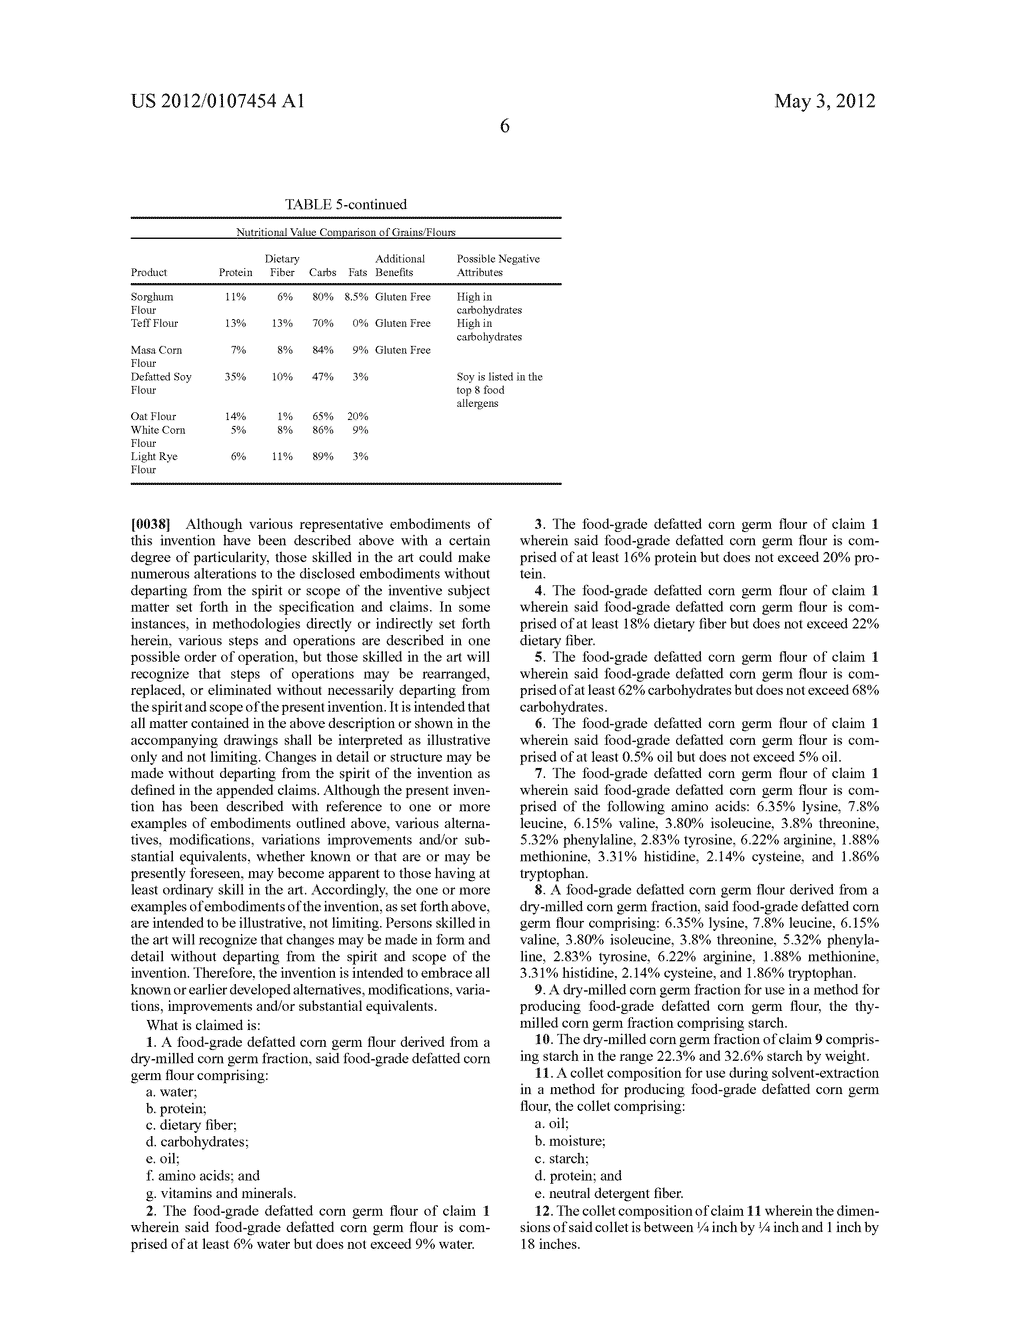 FOOD-GRADE FLOUR FROM DRY FRACTIONATED CORN GERM AND COLLET COMPOSITION     AND METHOD FOR PRODUCING SAME - diagram, schematic, and image 09